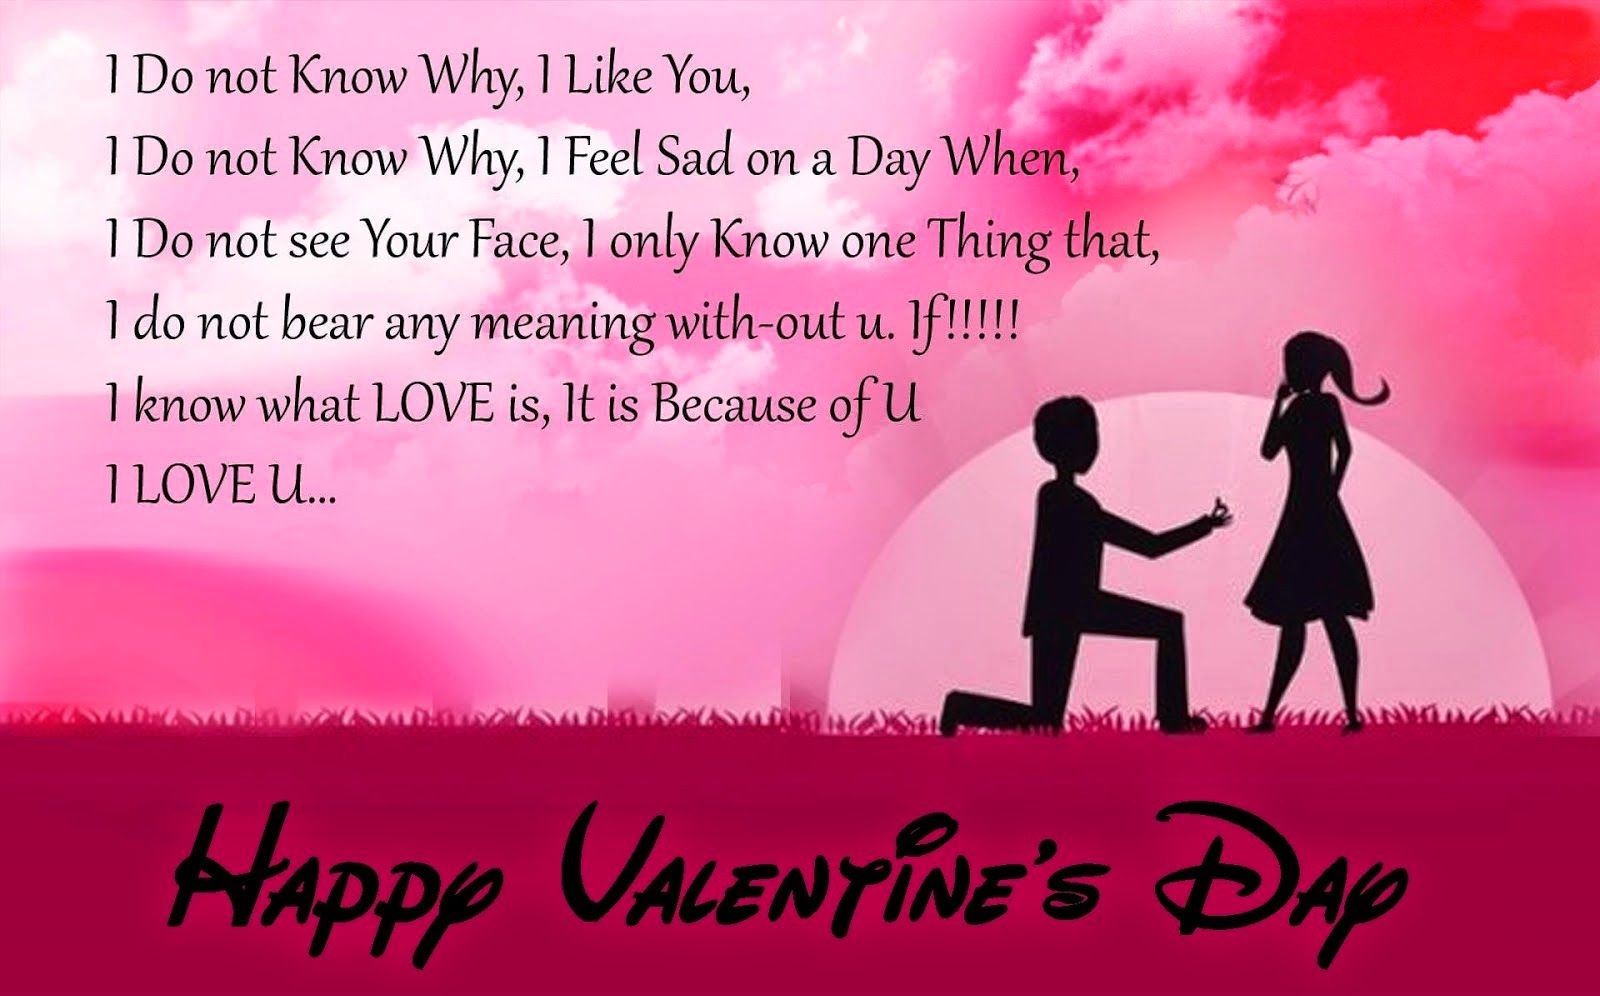 Valentine’s Day Quotes for Friends. 